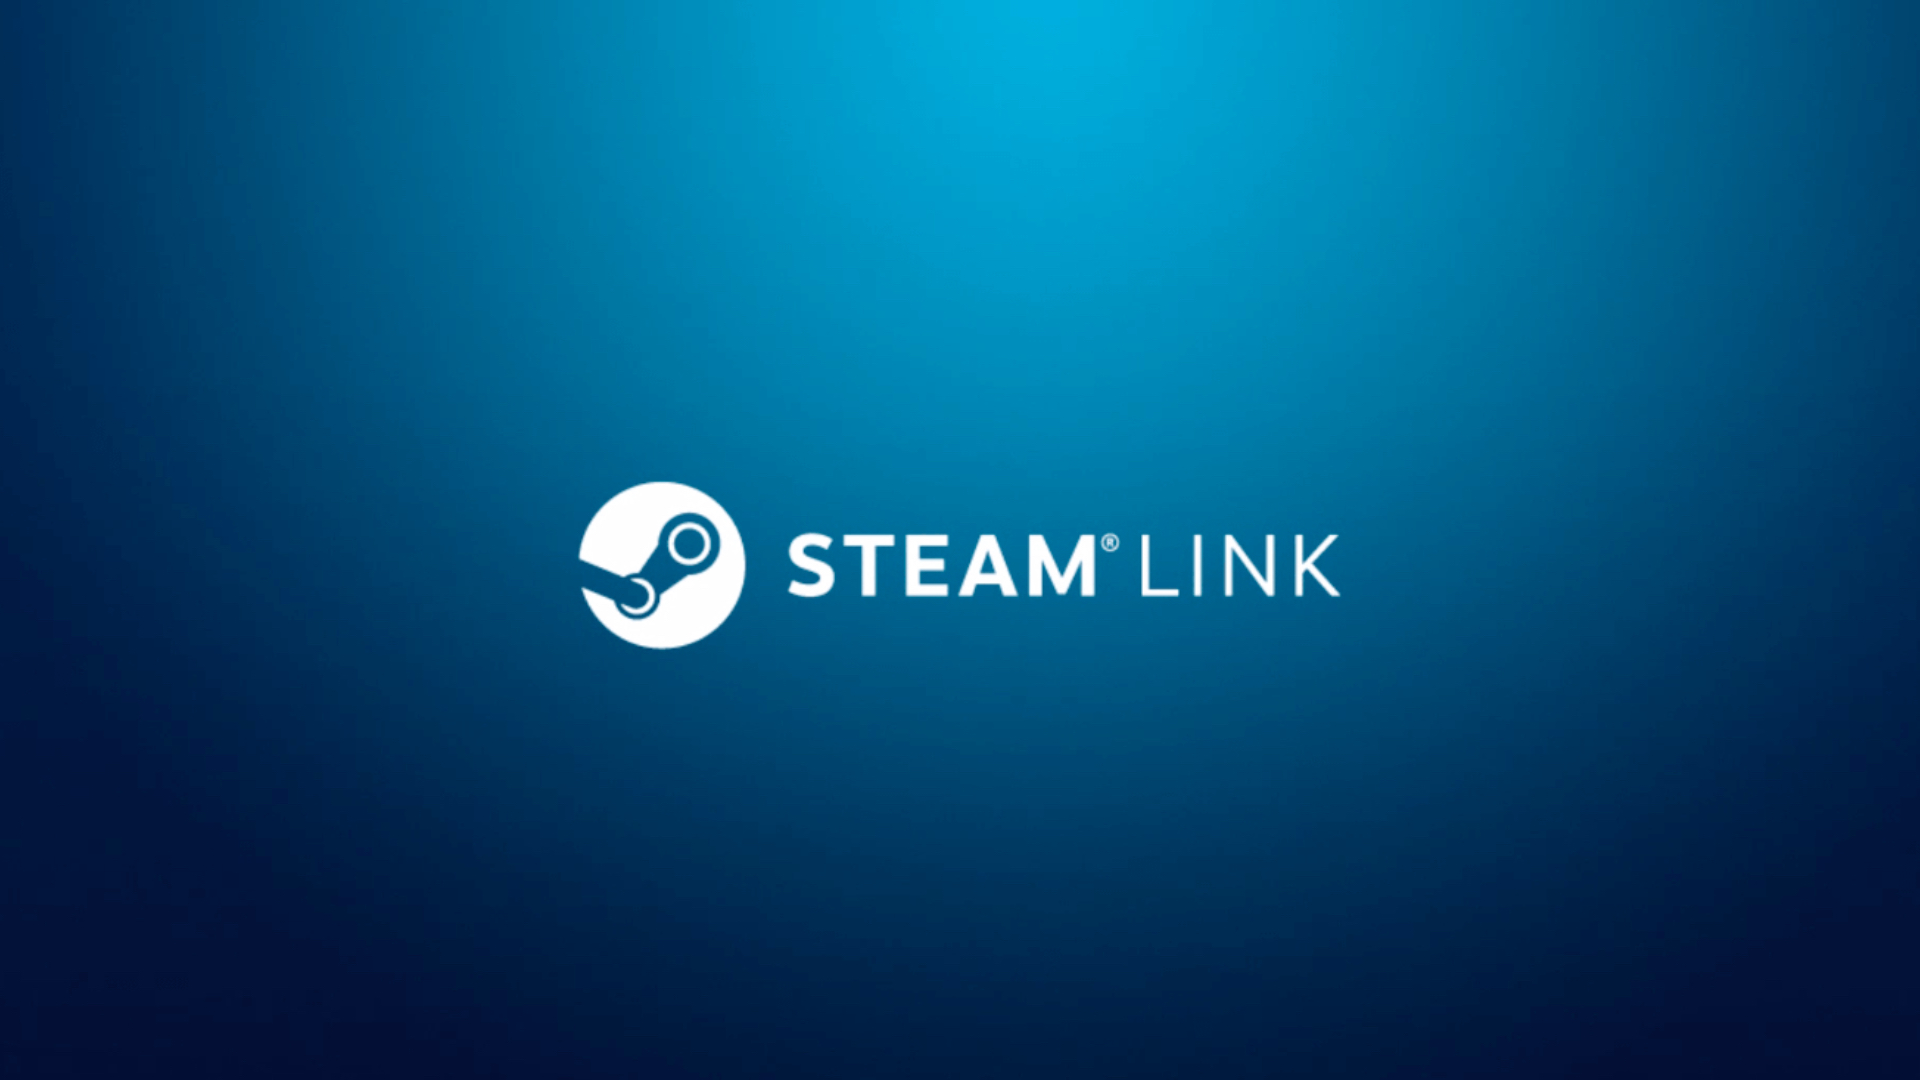 Steam Link App is Coming to Smartphones and Apple TVs; Stream Your PC Games